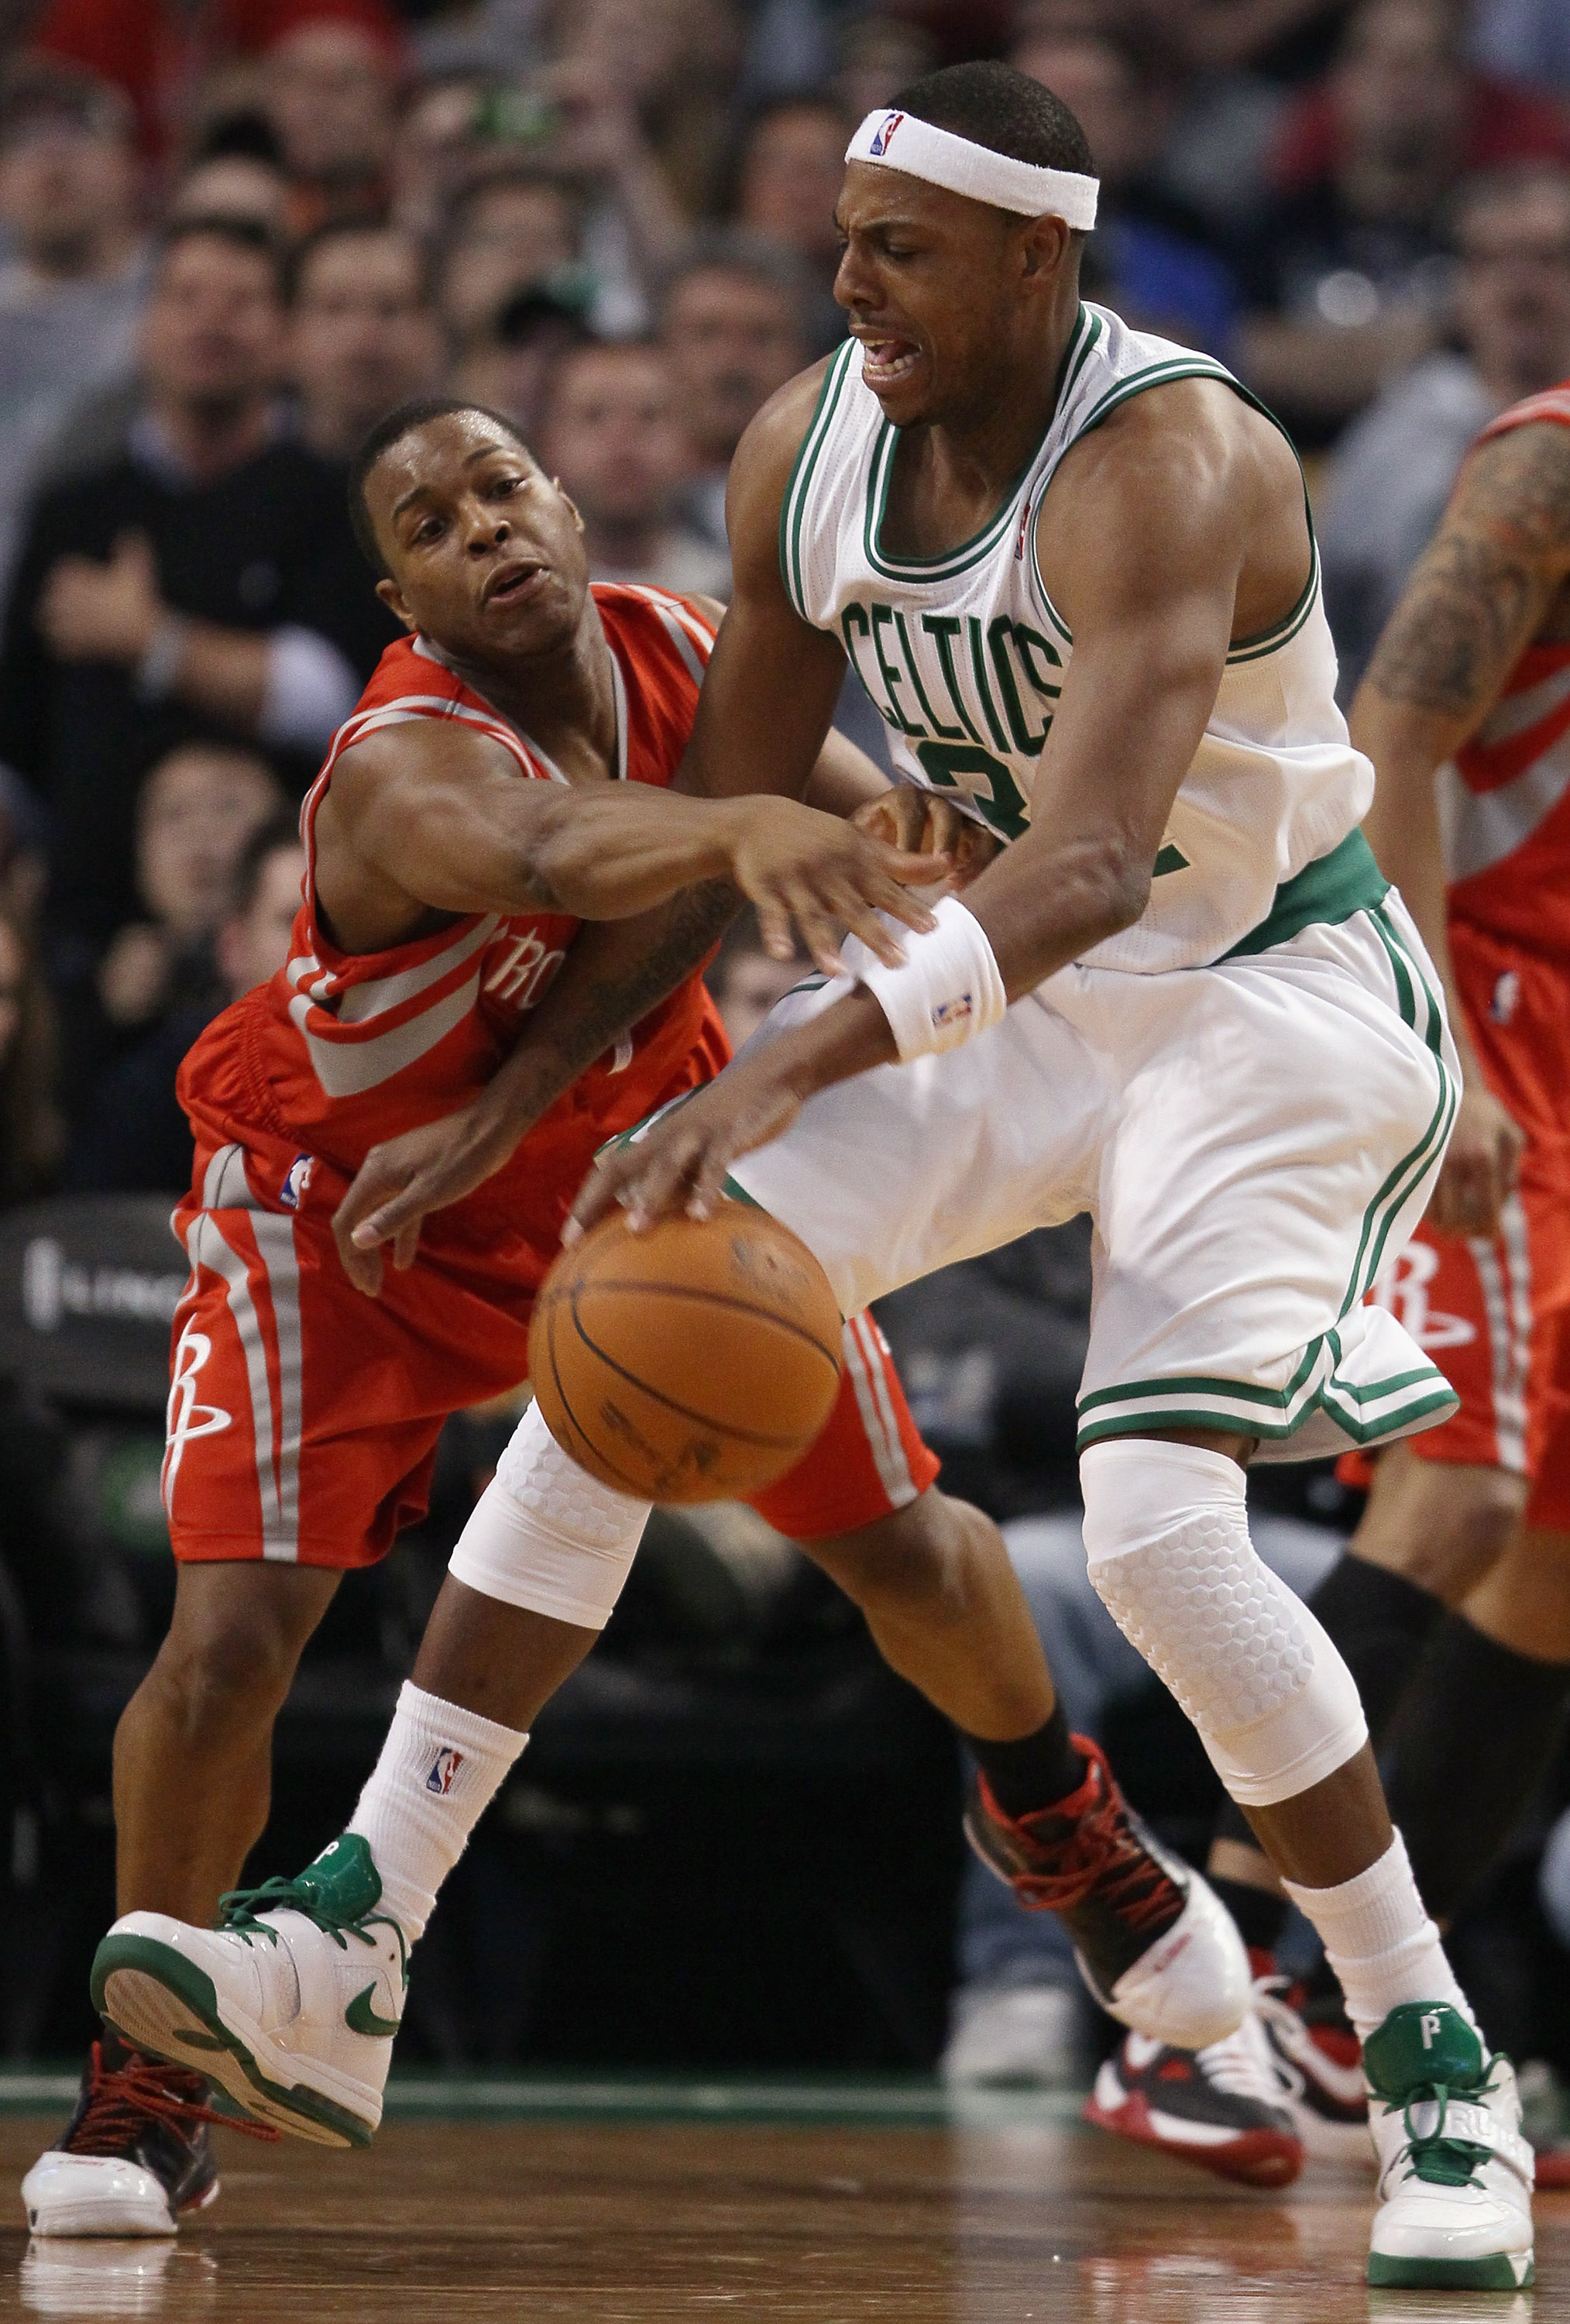 BOSTON, MA - JANUARY 10:  Paul Pierce #34 of the Boston Celtics tries to get around Kyle Lowry #7 of the Houston Rockets on January 10, 2011 at the TD Garden in Boston, Massachusetts.  The Rockets defeated the Celtics 108-102. NOTE TO USER: User expressly